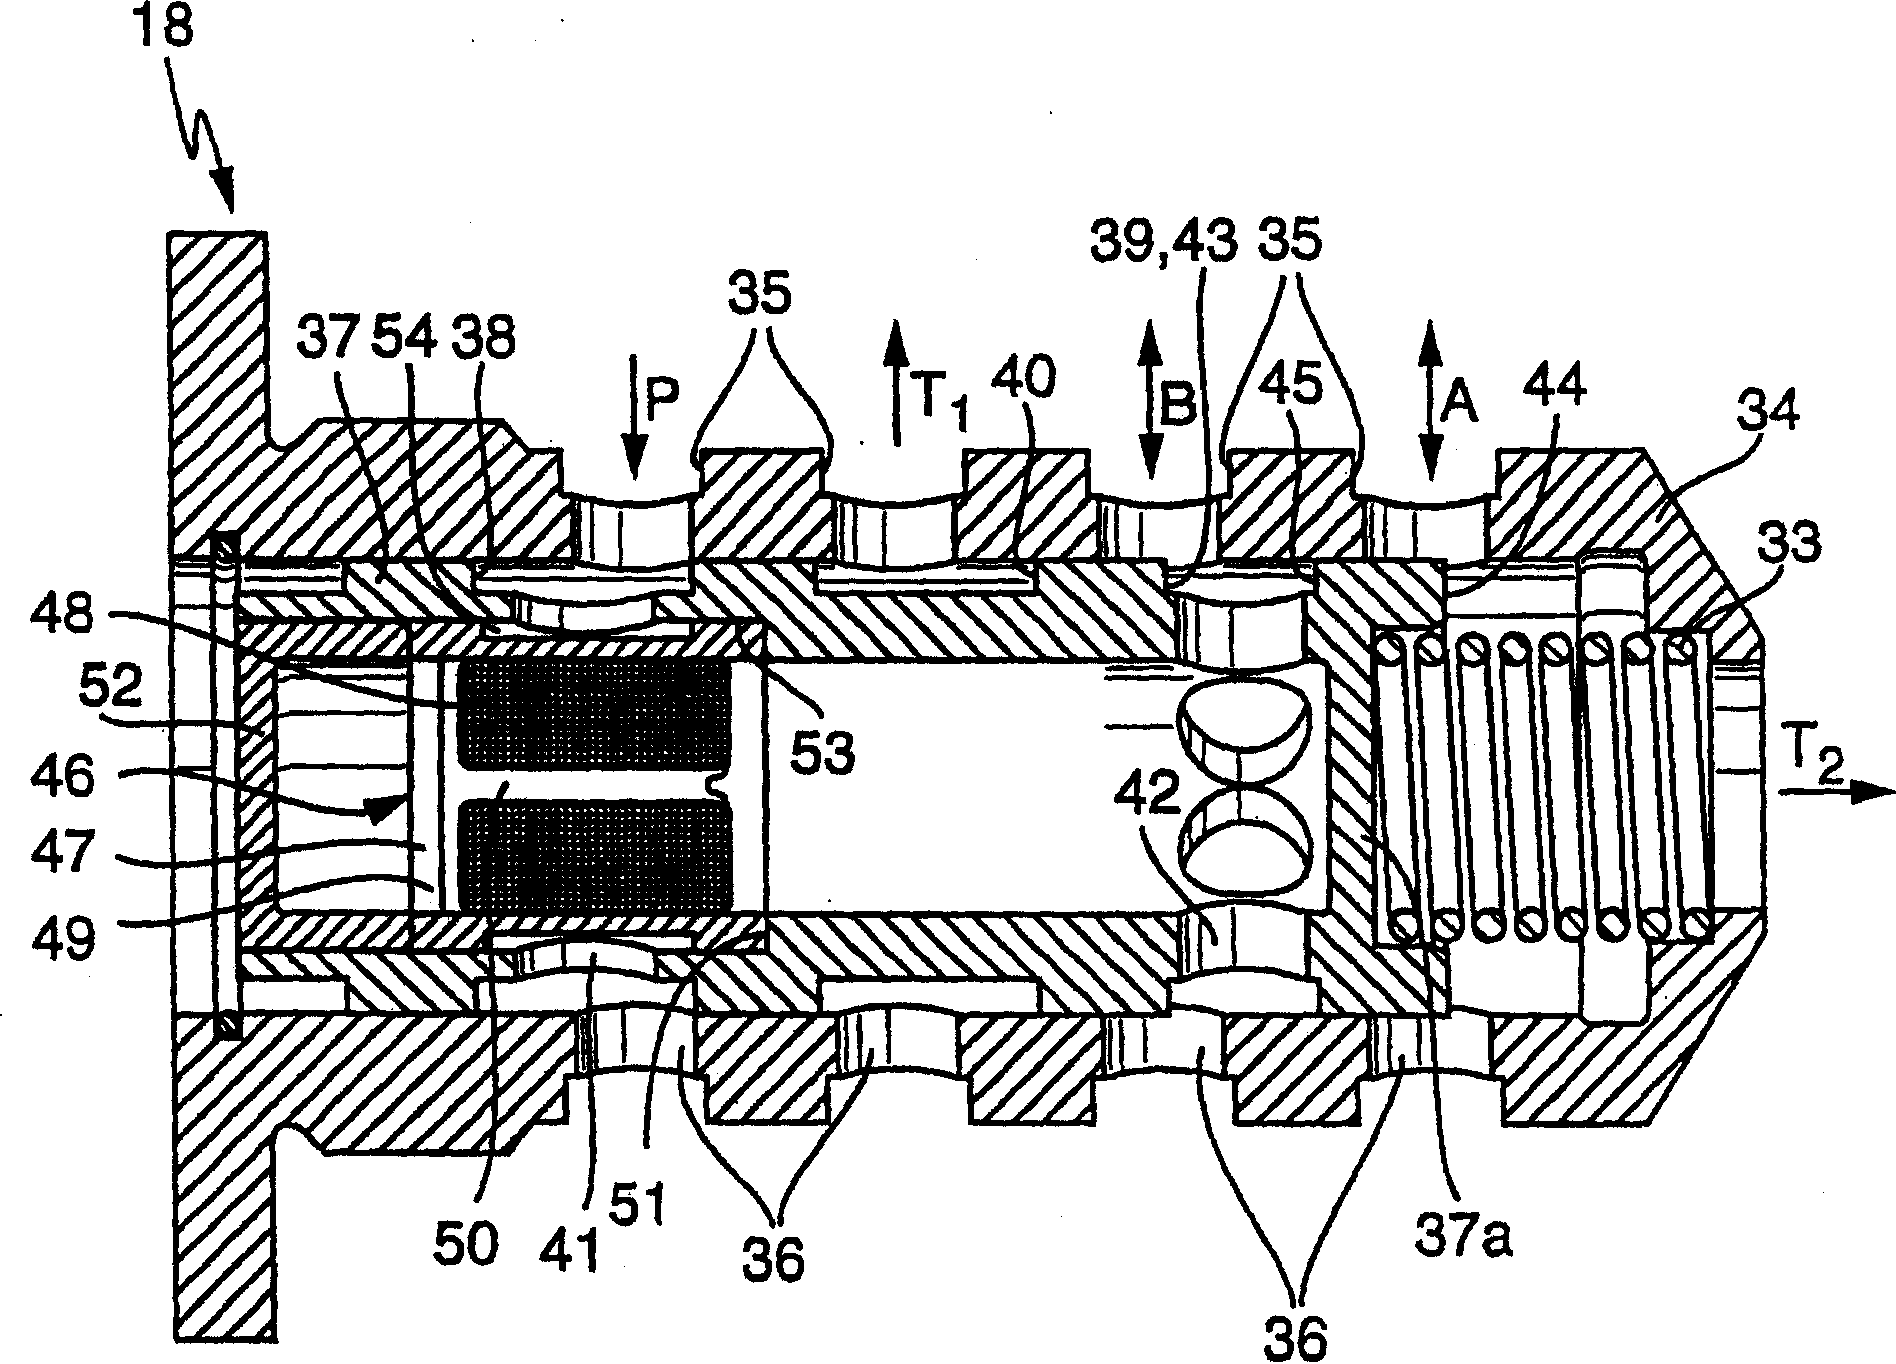 Control valve for a device to modify the timing of an internal combustion engine